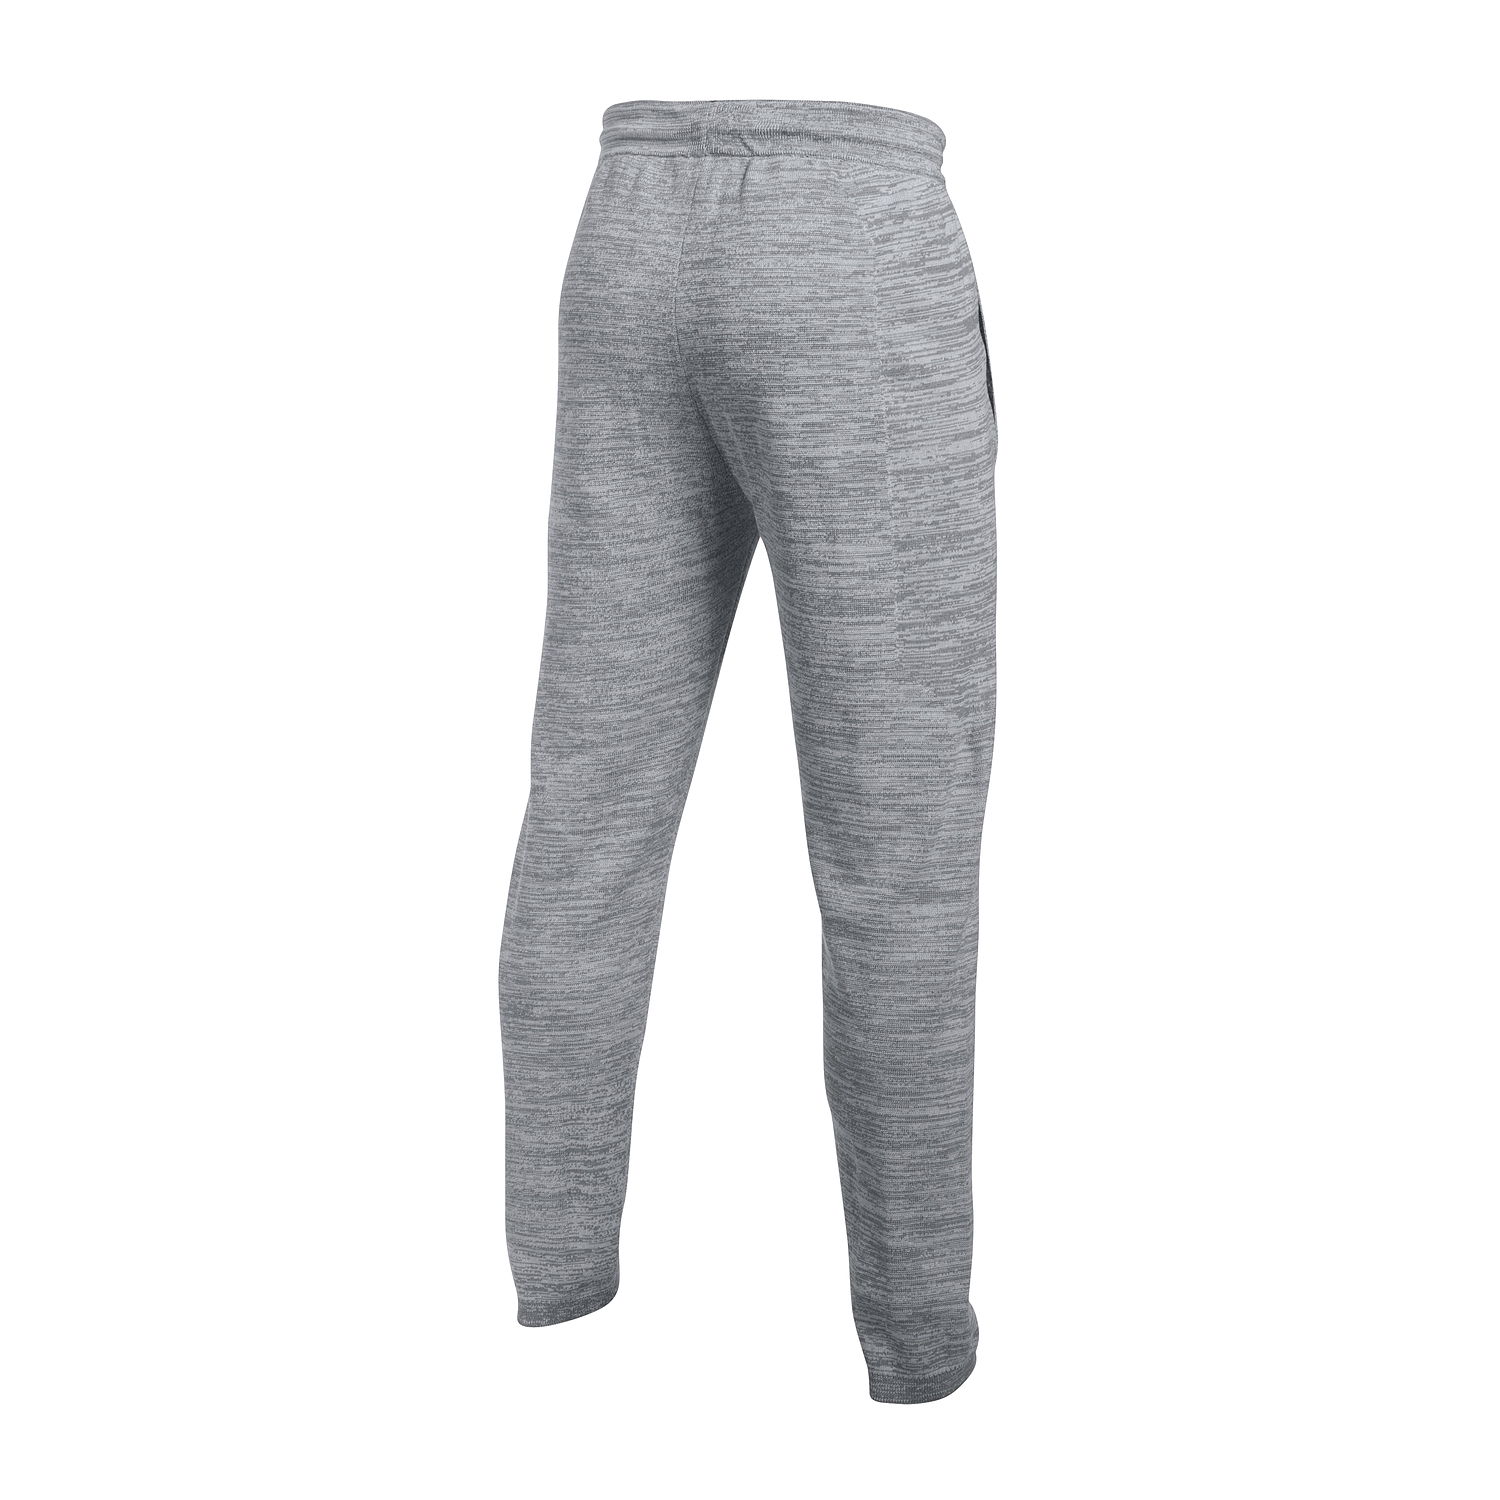 Under Armour Stephen Curry SC30 Mens Jogger Sweat Pants (XLarge, True Gray) - image 2 of 2